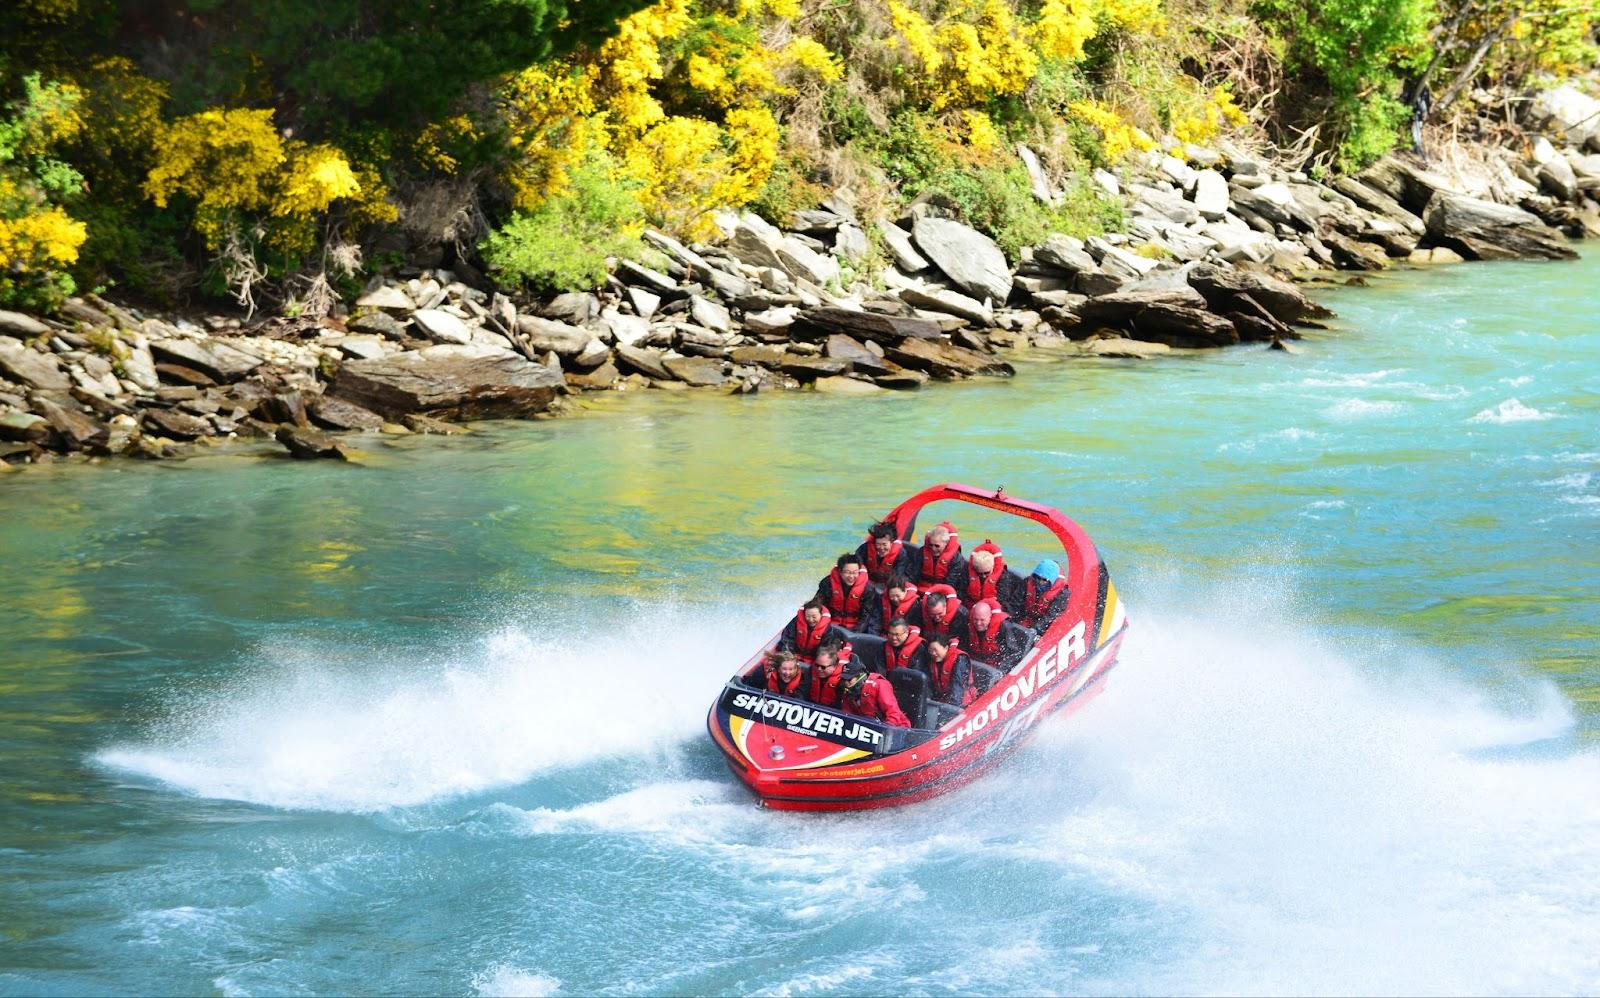 Tourists enjoy a high-speed boat ride on Queenstown's Shotover river